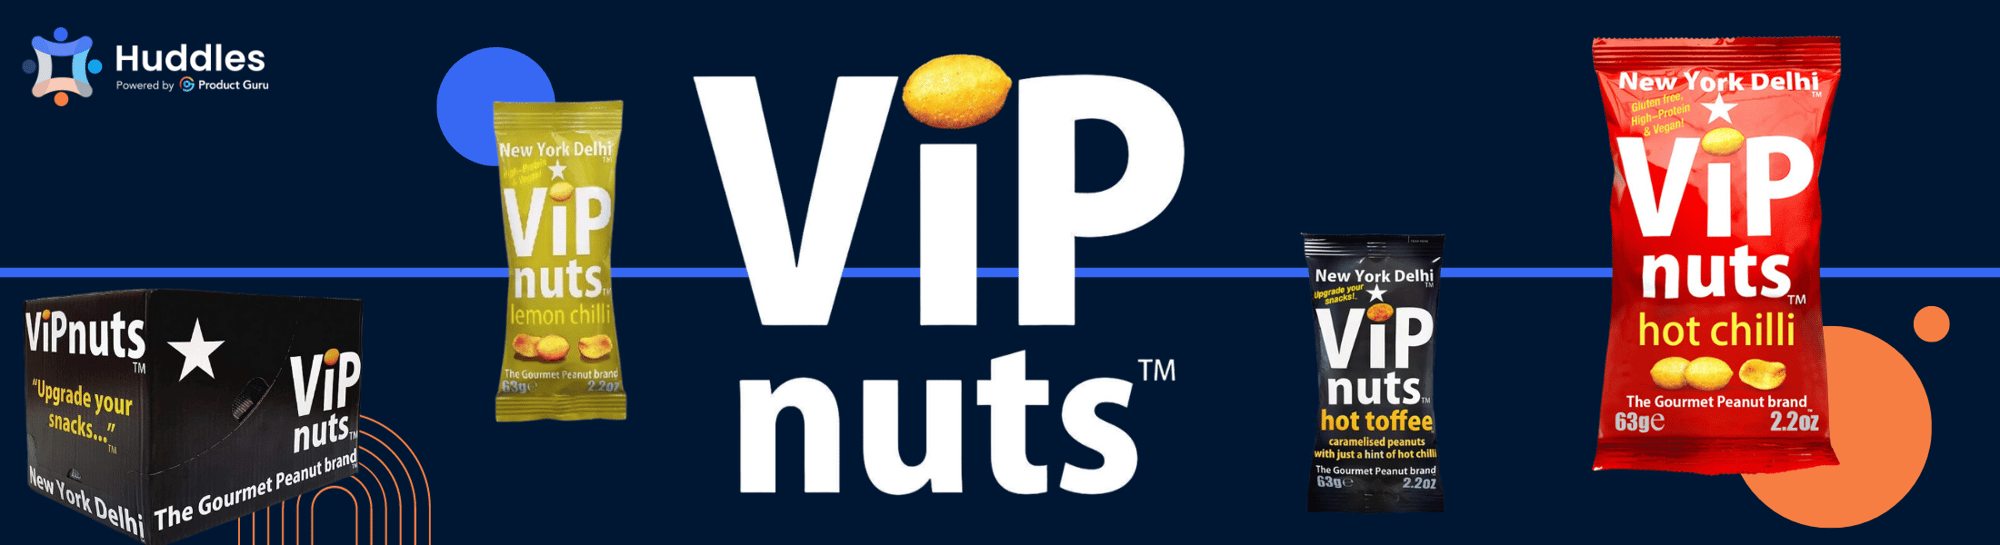 vip nuts banner